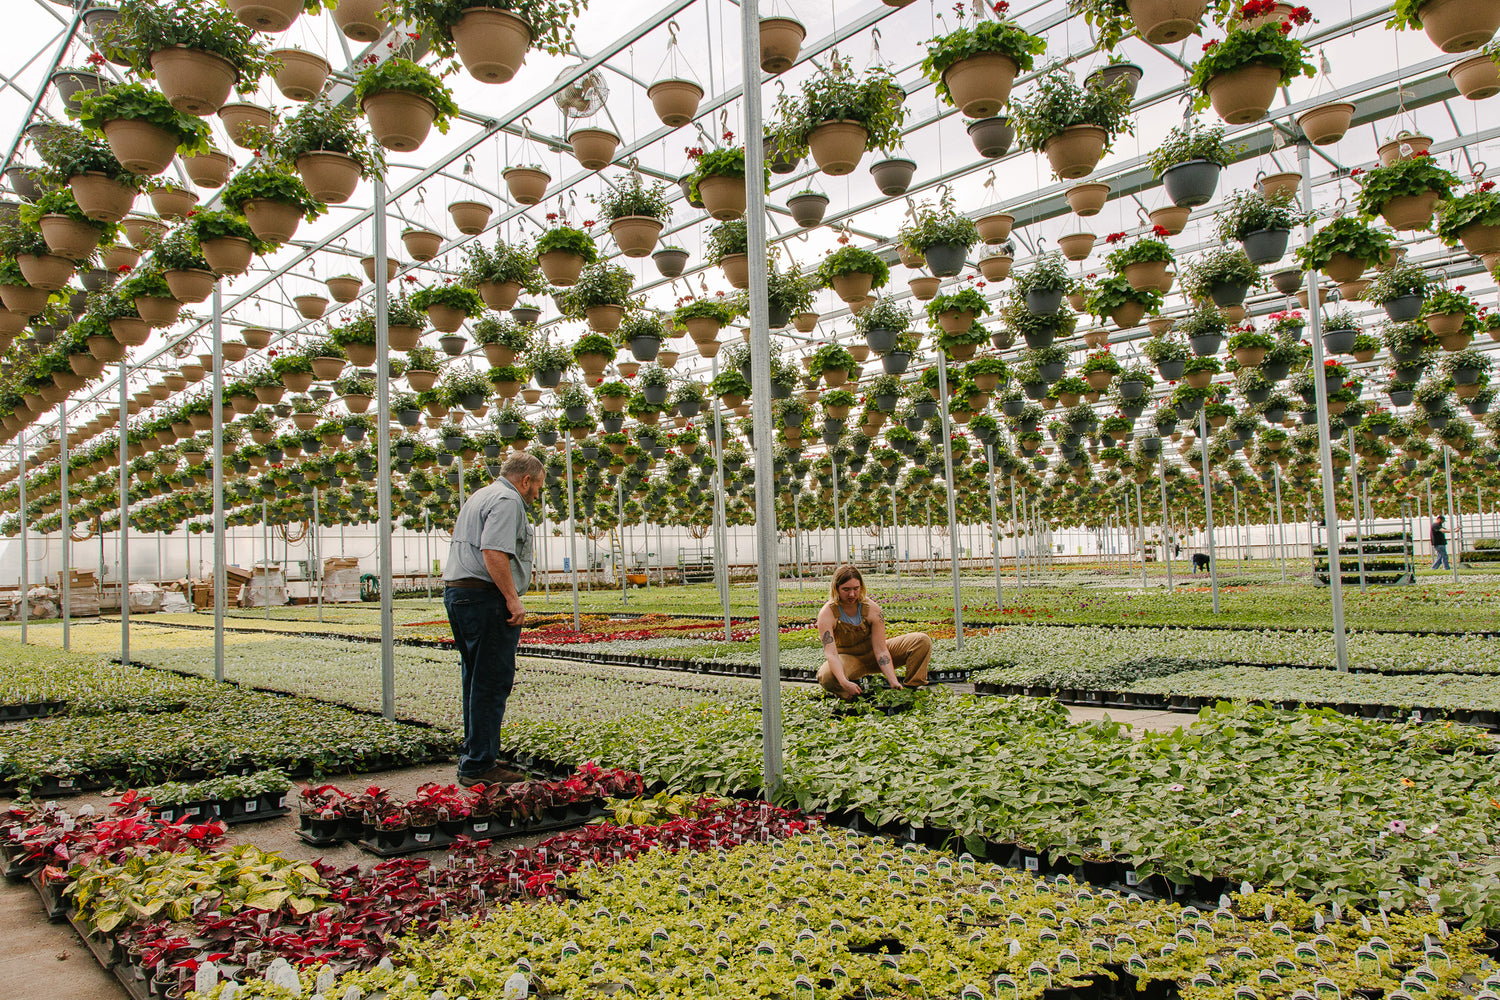 Supplied by 10+ acres of on-site Greenhouses